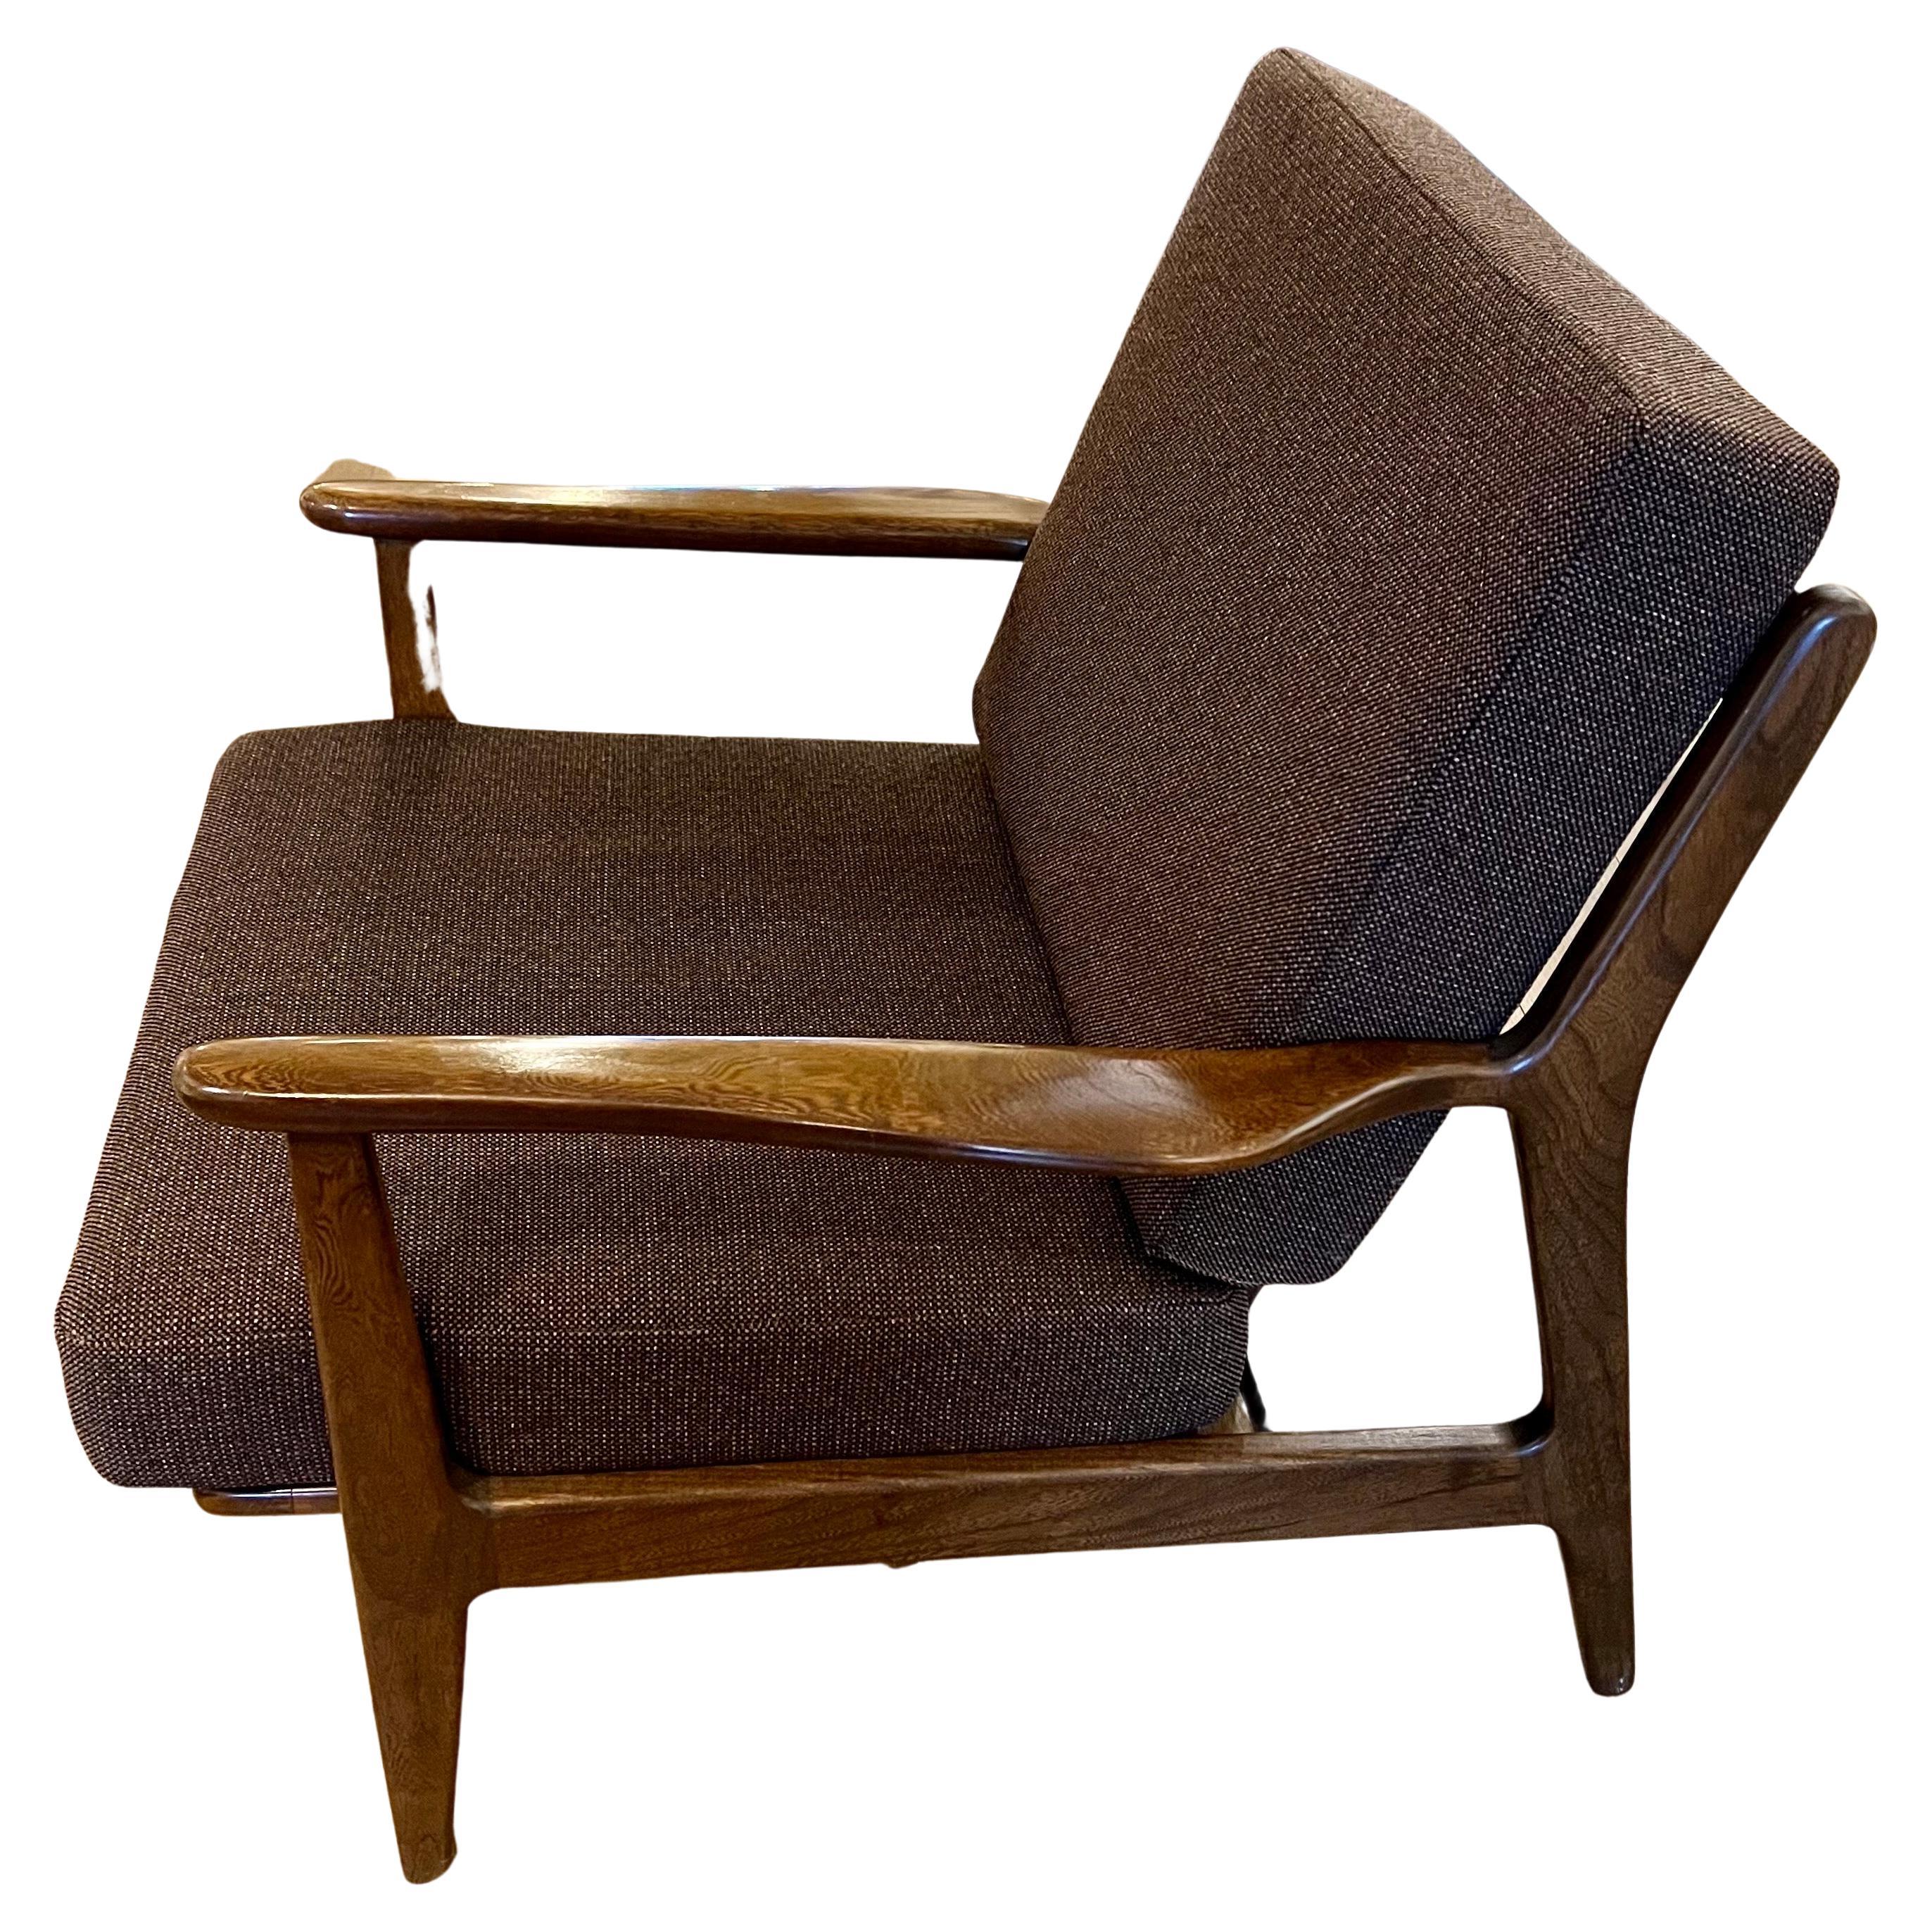 Beautiful American MCM walnut lounge chair by Viko Baumritter for Baumritter of New York, circa the 1960s. The frame is in excellent condition and are very sturdy and solid. The chairs feature a spindle back, and sculpted armrests we have recovered